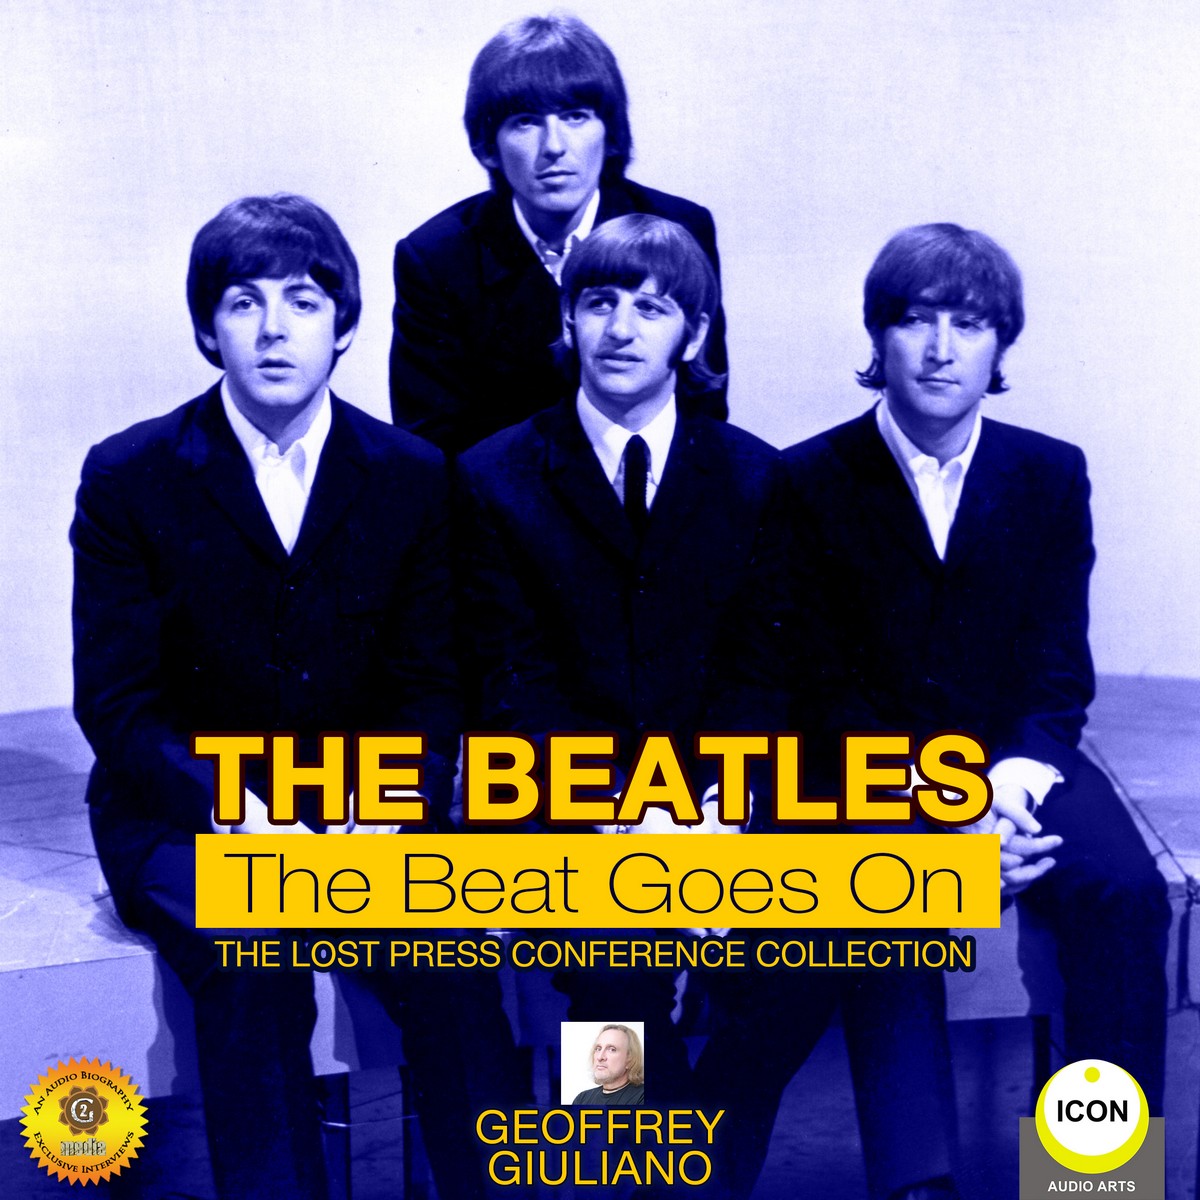 The Beatles The Beat Goes On – The Lost Press Conference Collection